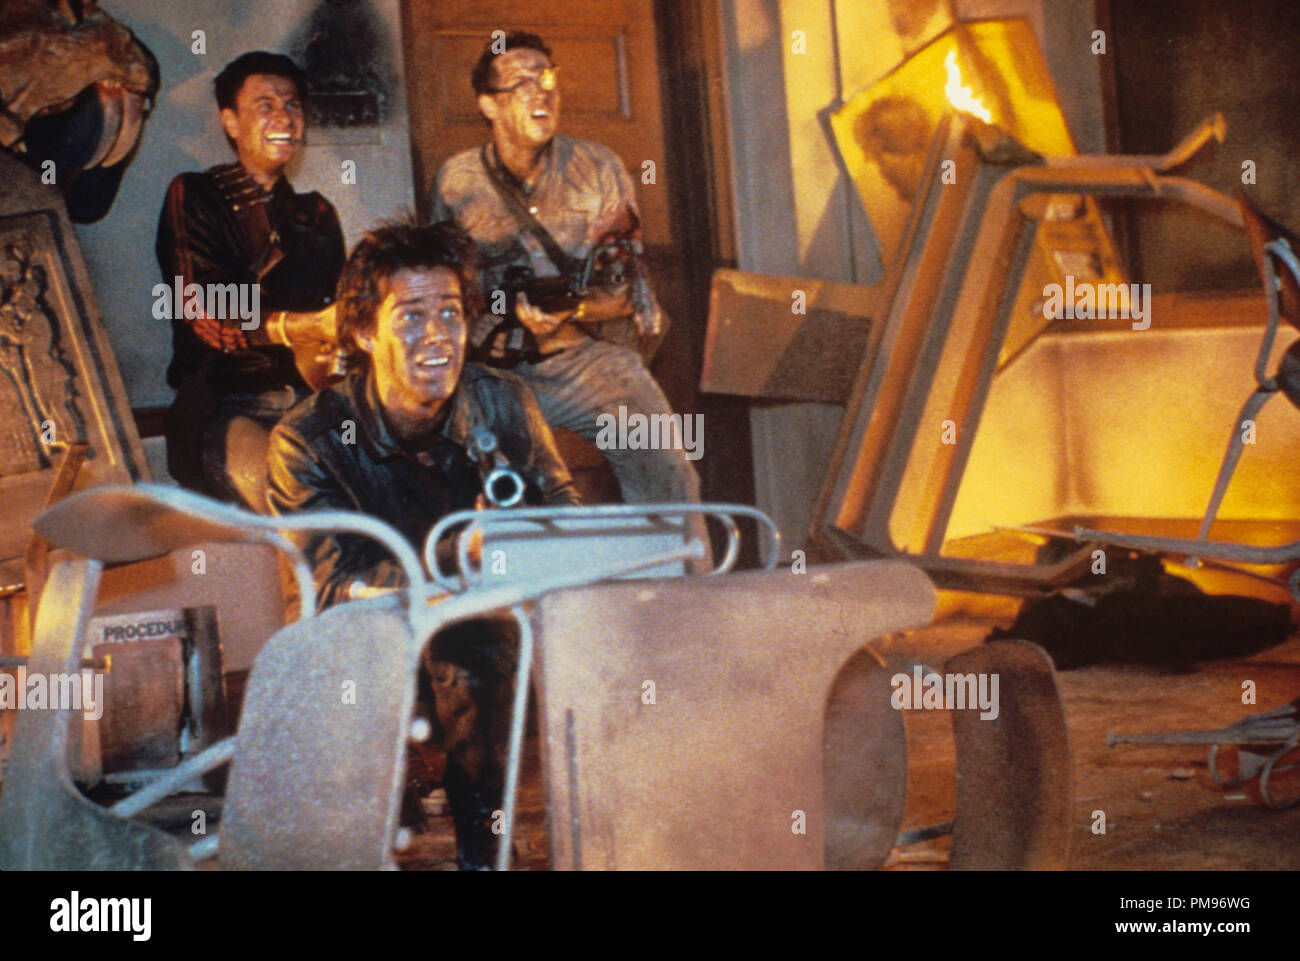 Studio Publicity Still from 'My Science Project' Fisher Stevens, John Stockwell © 1985 Touchstone Pictures  All Rights Reserved   File Reference # 31703209THA  For Editorial Use Only Stock Photo